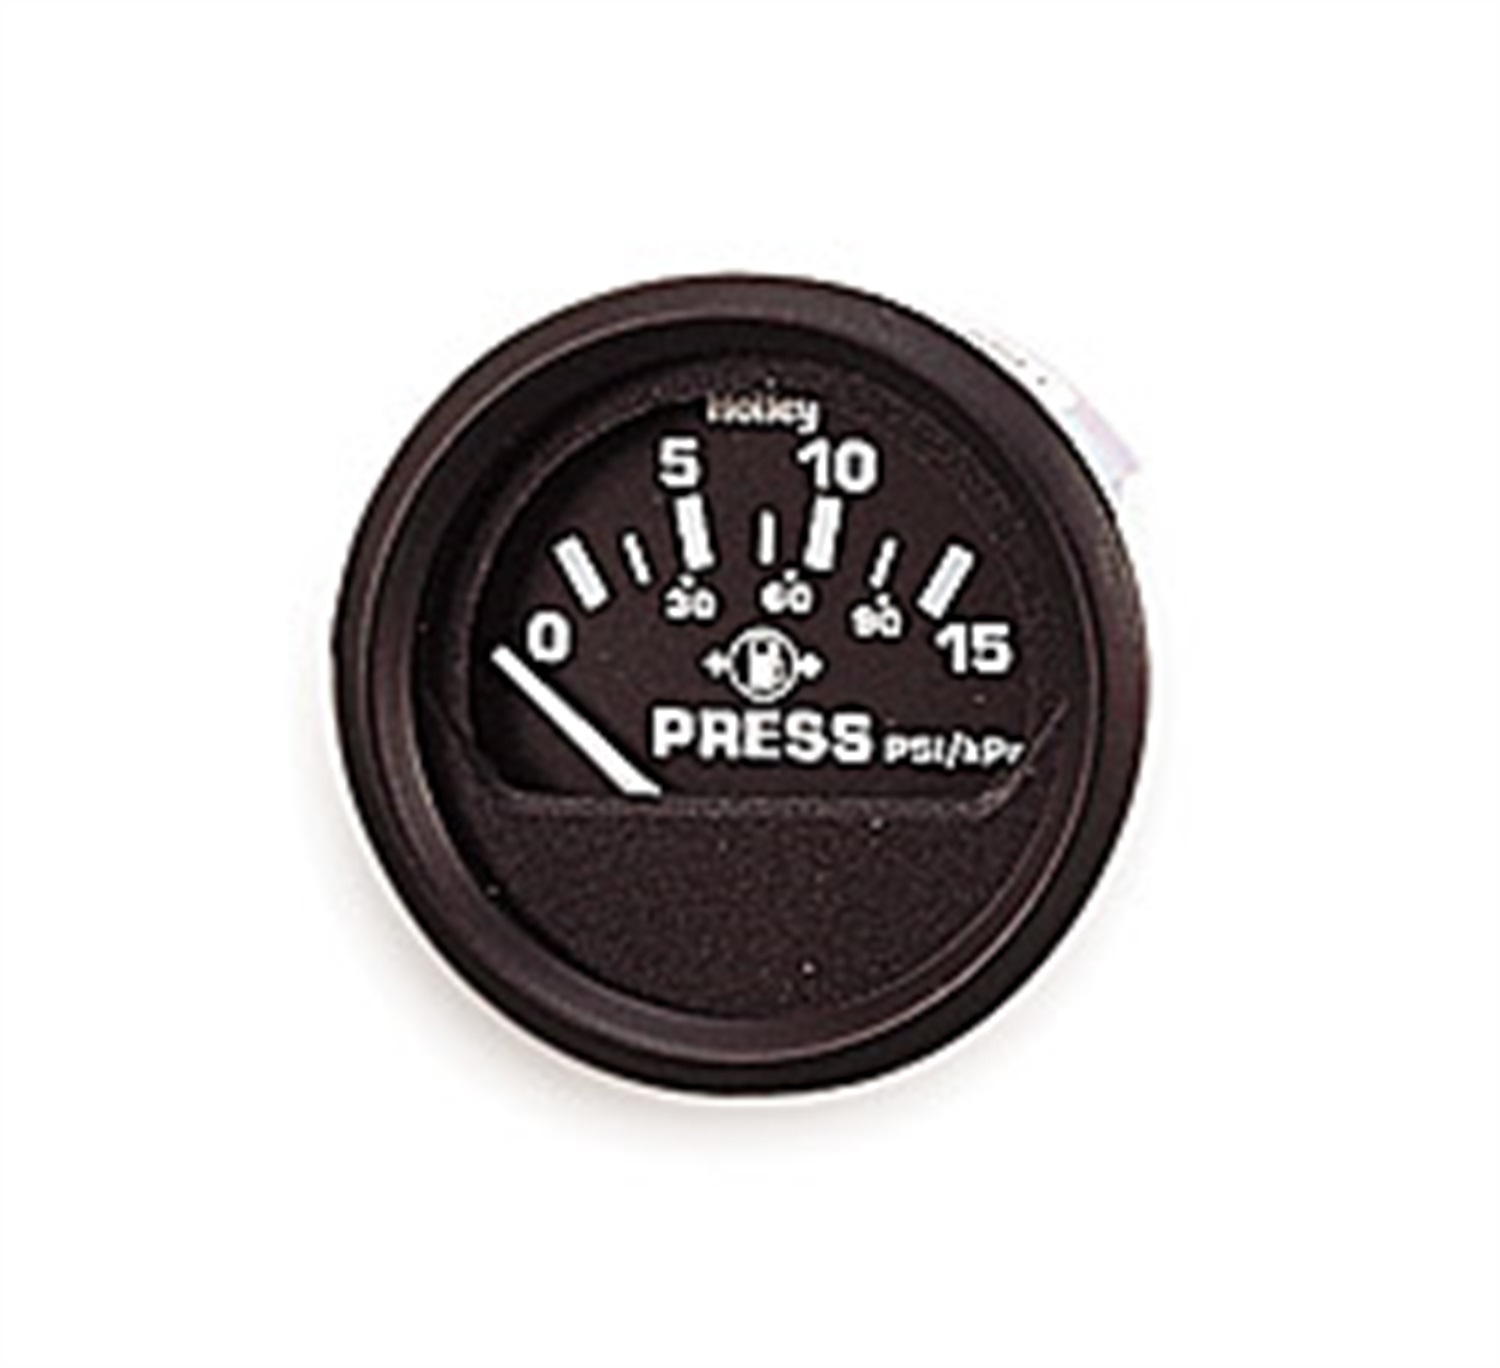 Holley Performance Holley Performance 26-503 Electric Fuel Pressure Gauge